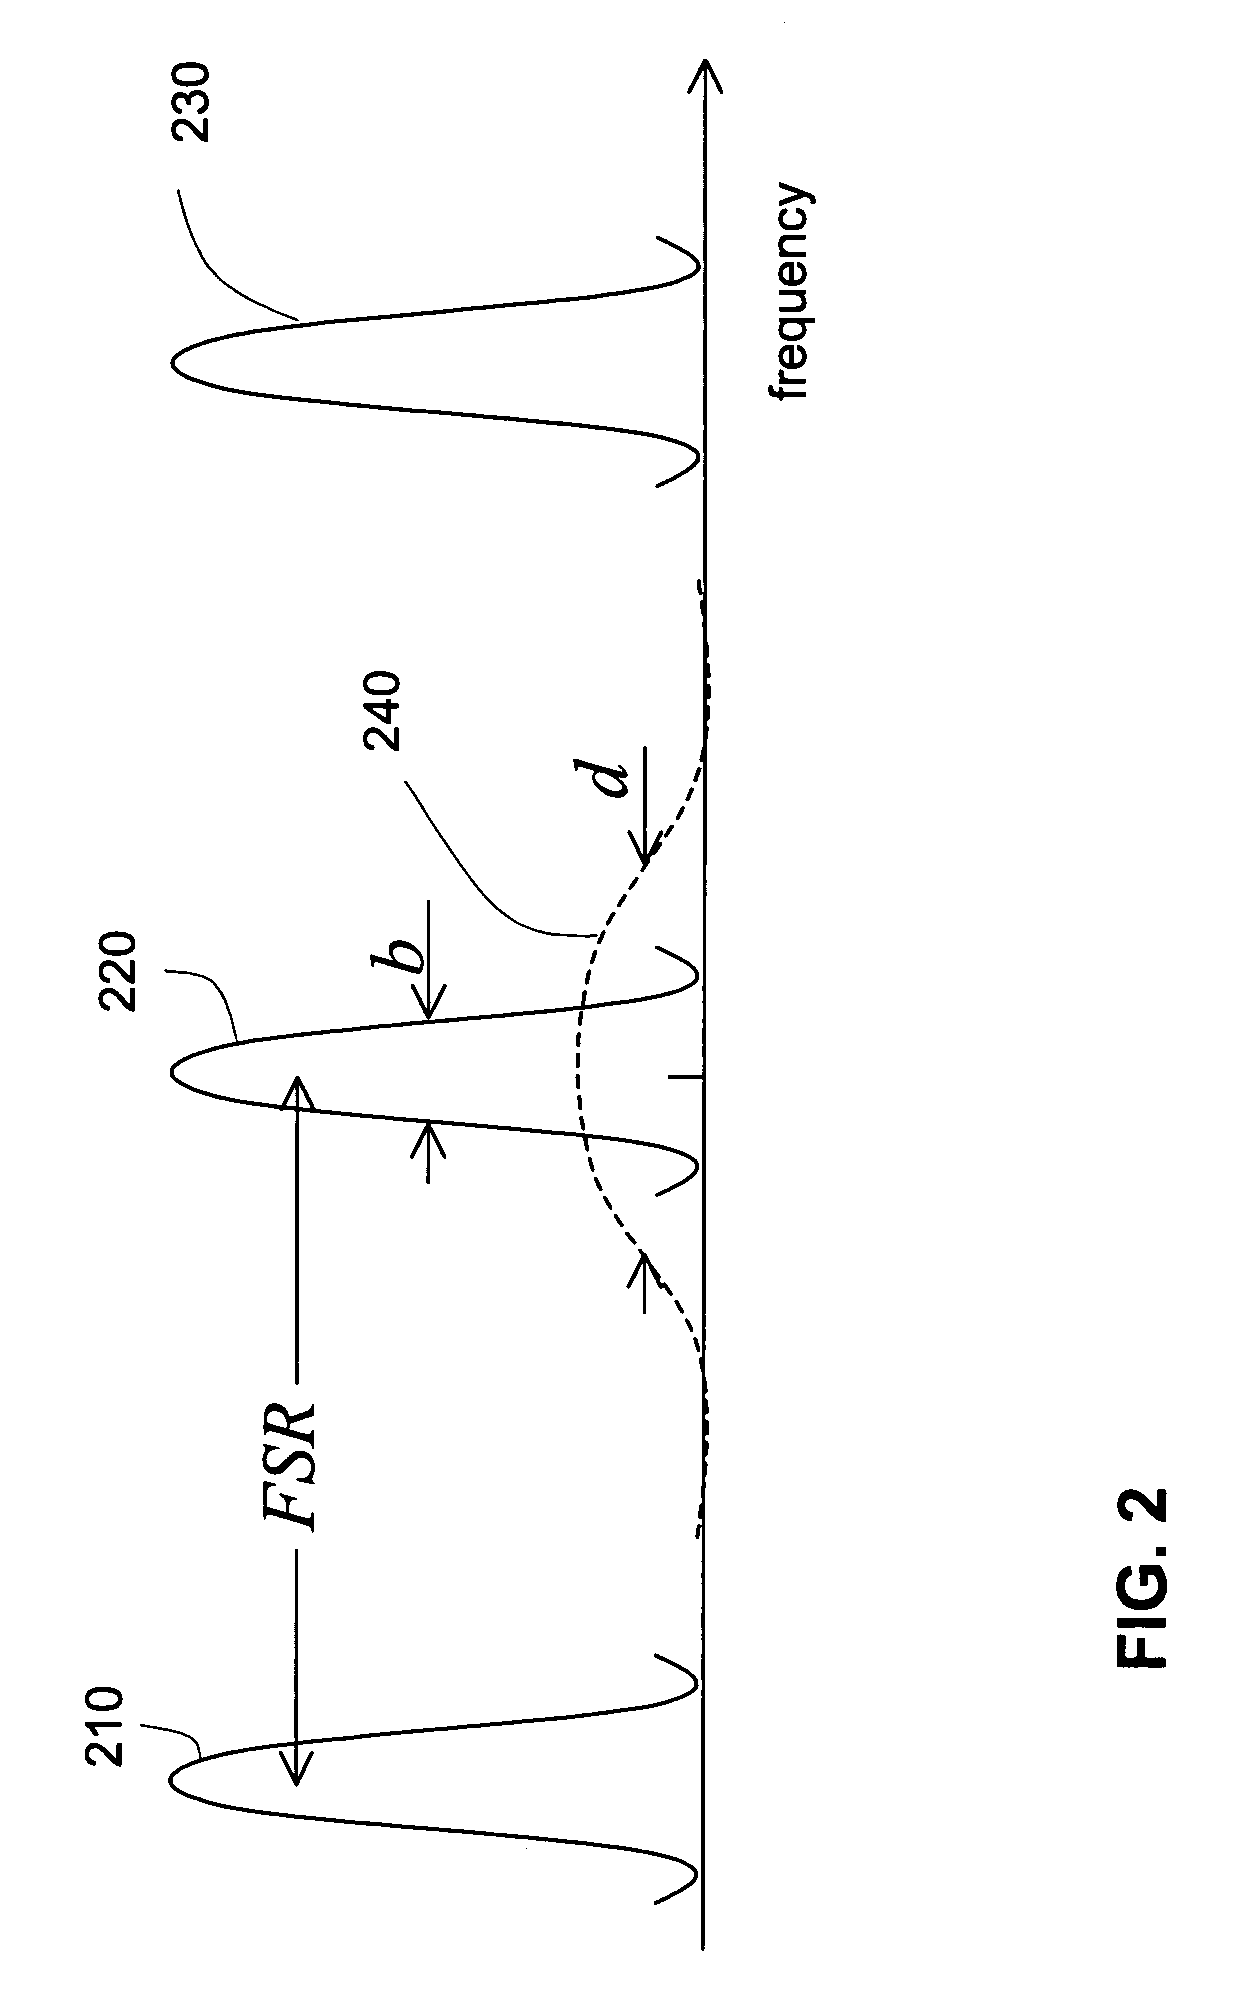 Laser device for nonlinear conversion of light